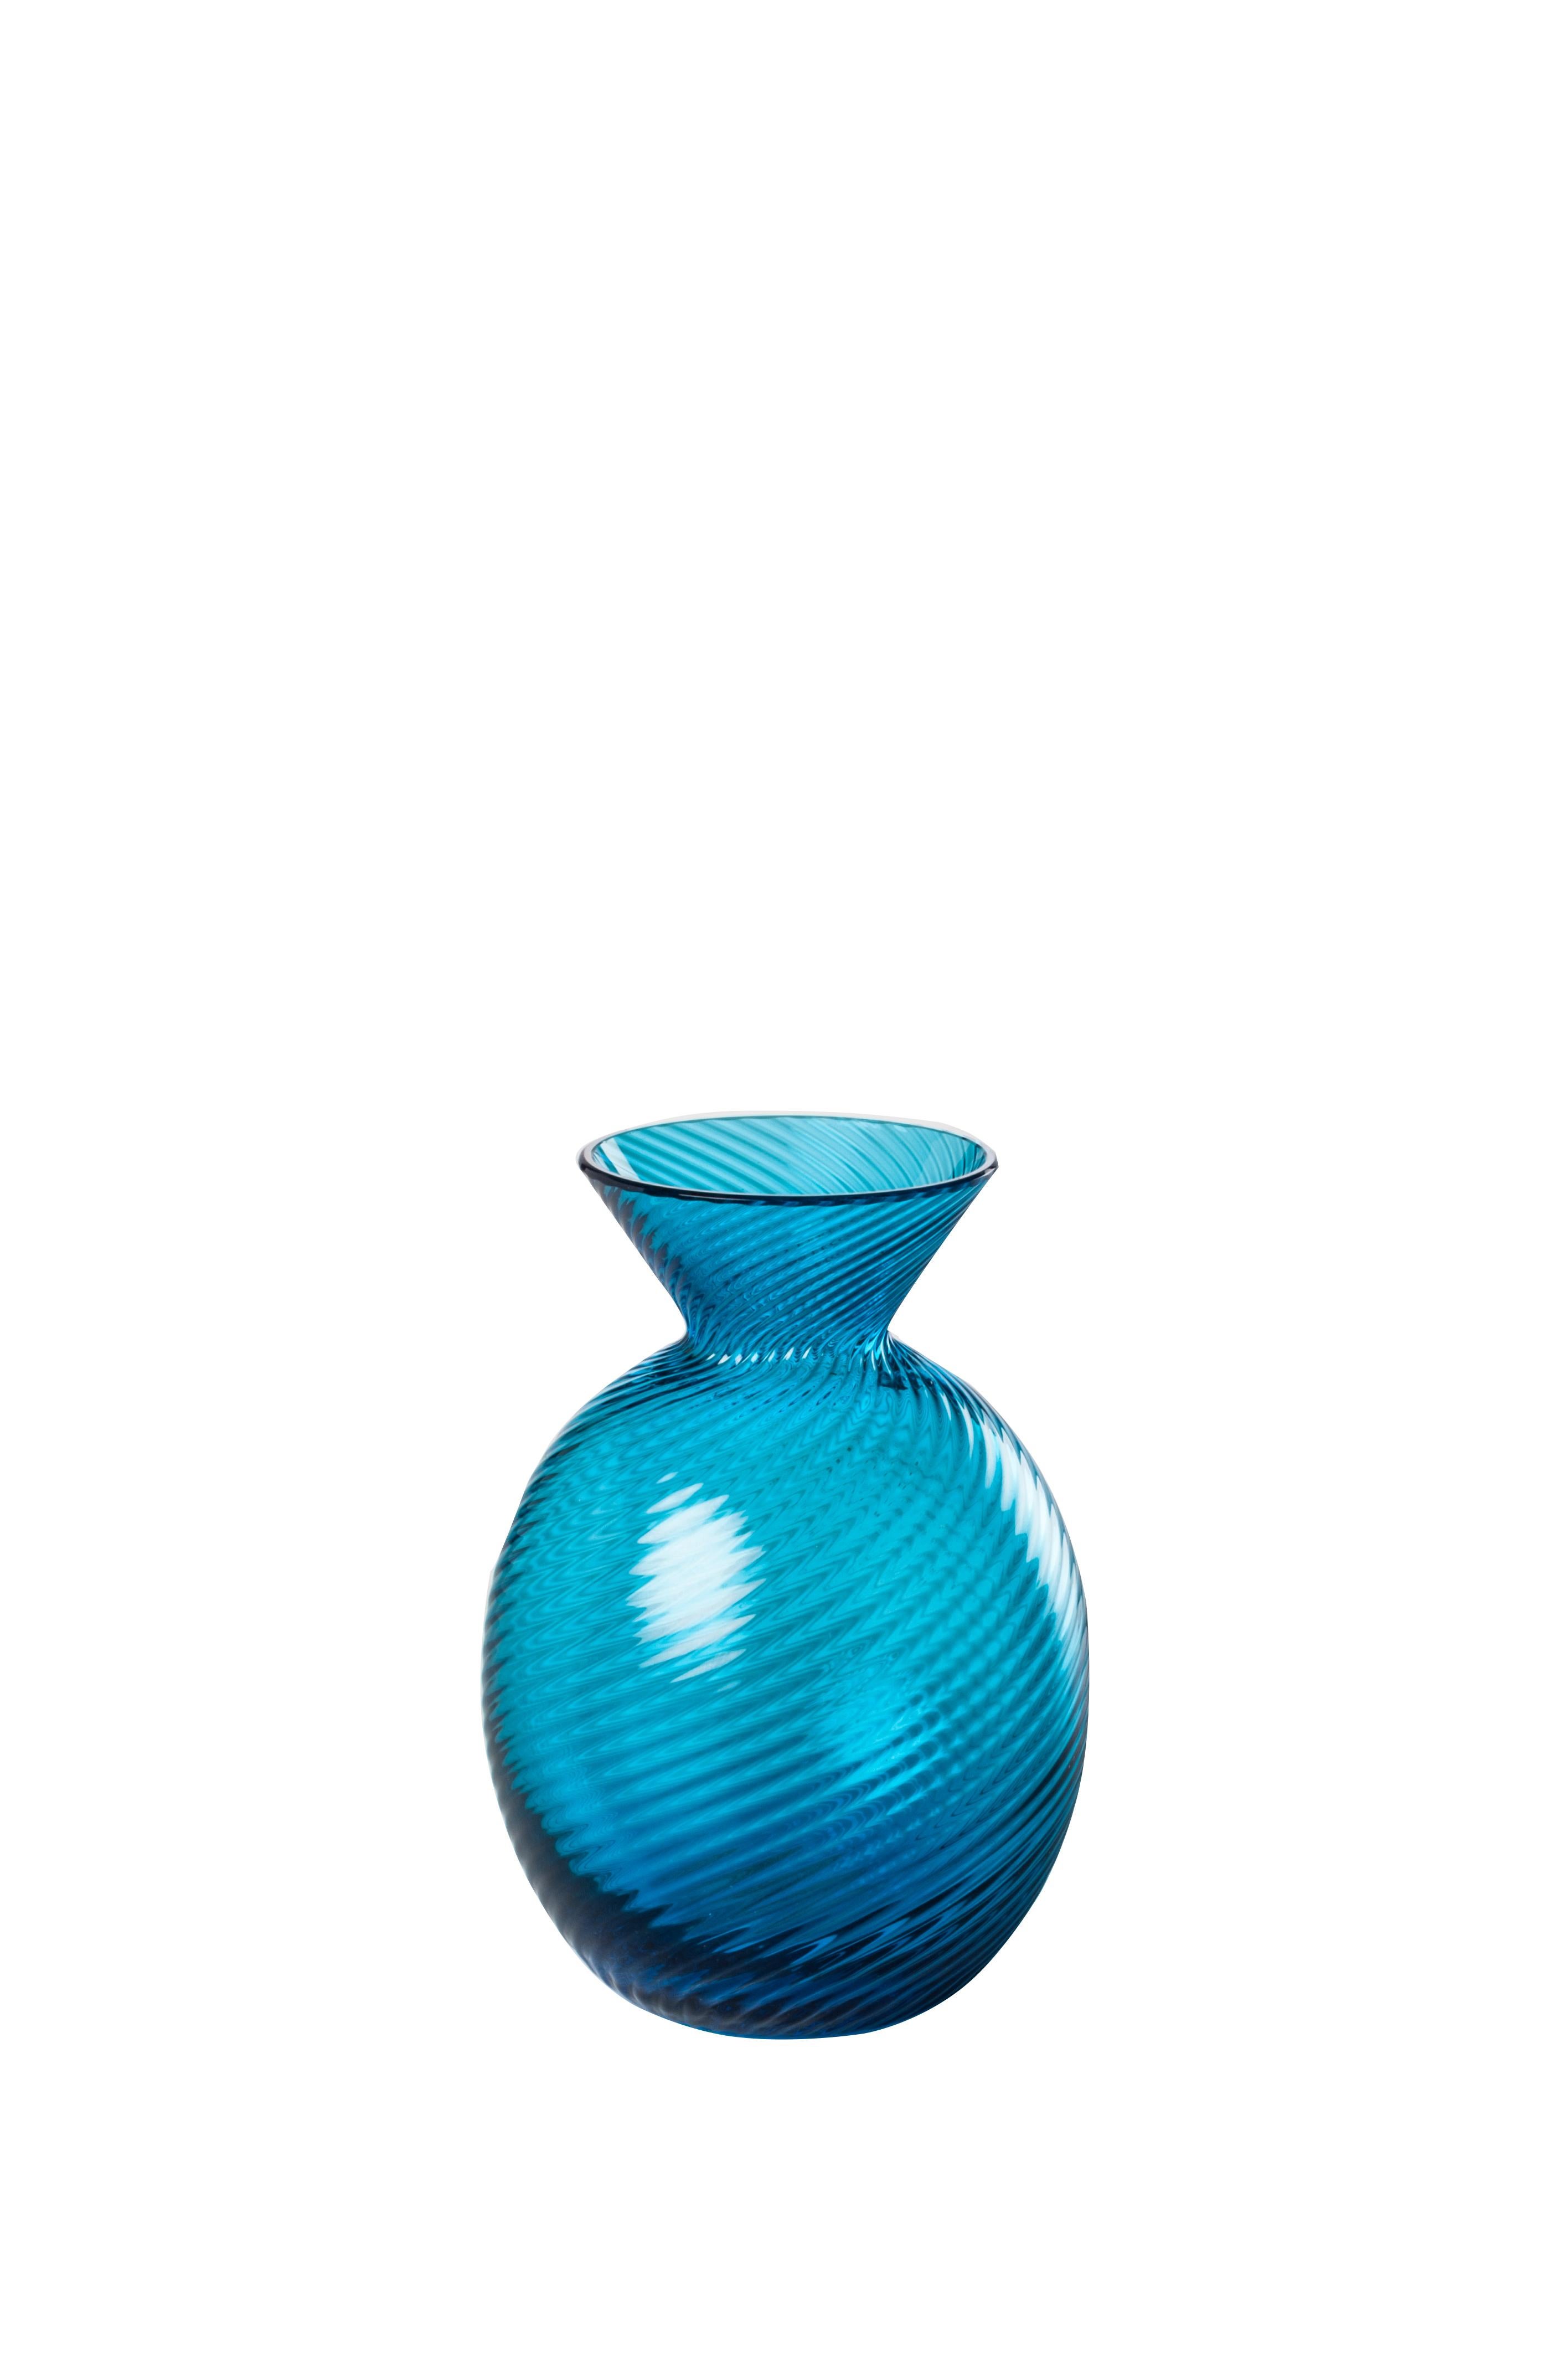 Venini glass vase with shaped body and neck in sapphire designed in 2017. Perfect for indoor home decor as container or statement piece for any room. Also available in other colors on 1stdibs.

Dimensions: 8 cm diameter x 12 cm height.